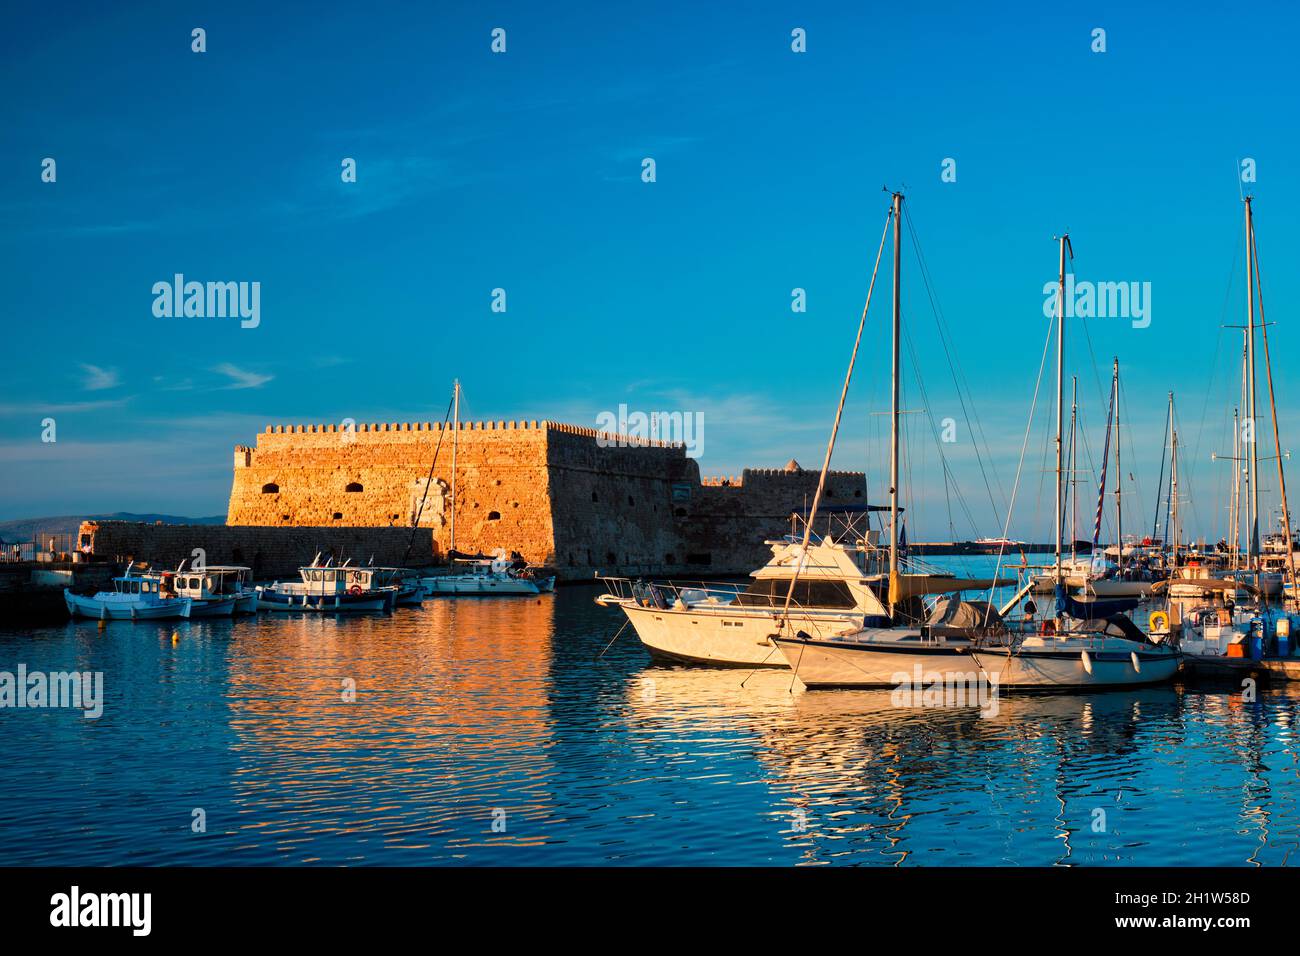 Venetian Fort Venetian fortress of Koules Castello a Mare castle in Heraklion and moored Greek fishing boats in port, Crete Island, Greece on sunset Stock Photo